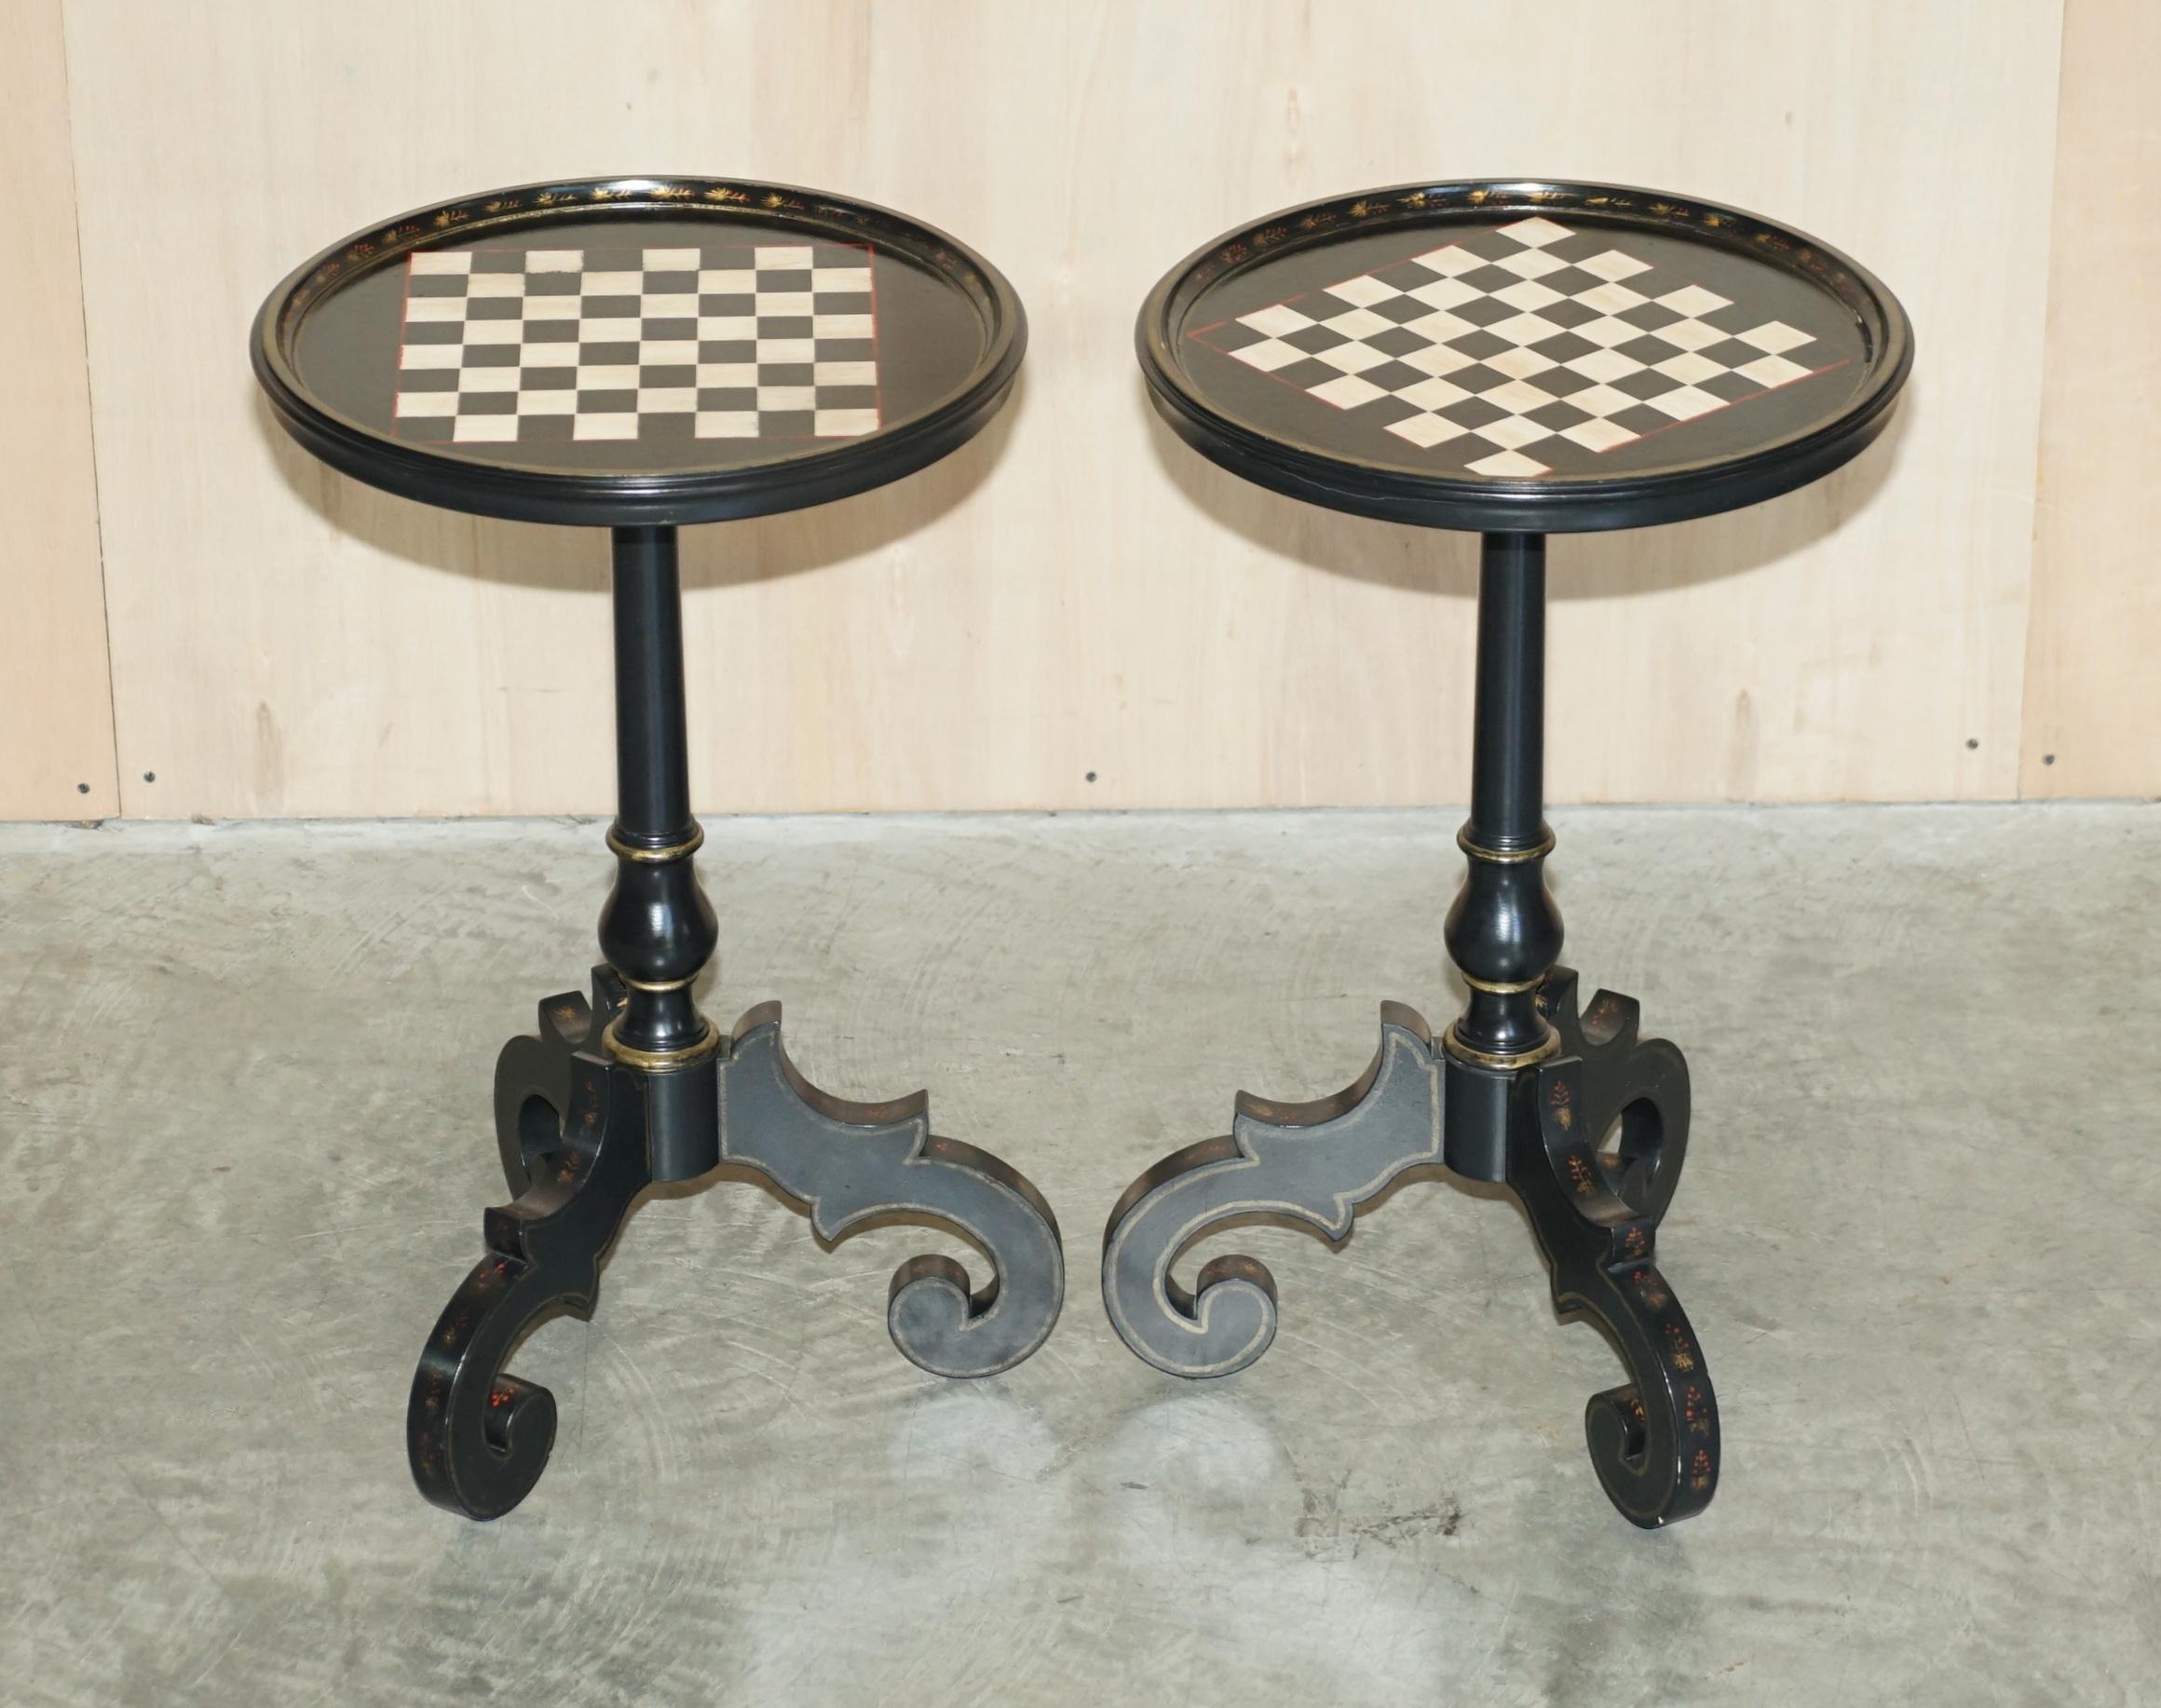 We are delighted to offer this lovely pair of late Victorian Ebonised hand painted Chess games tables

A very good looking well-made and function pair, extremely decorative, the tops have been what looks like polychrome painted 

The condition